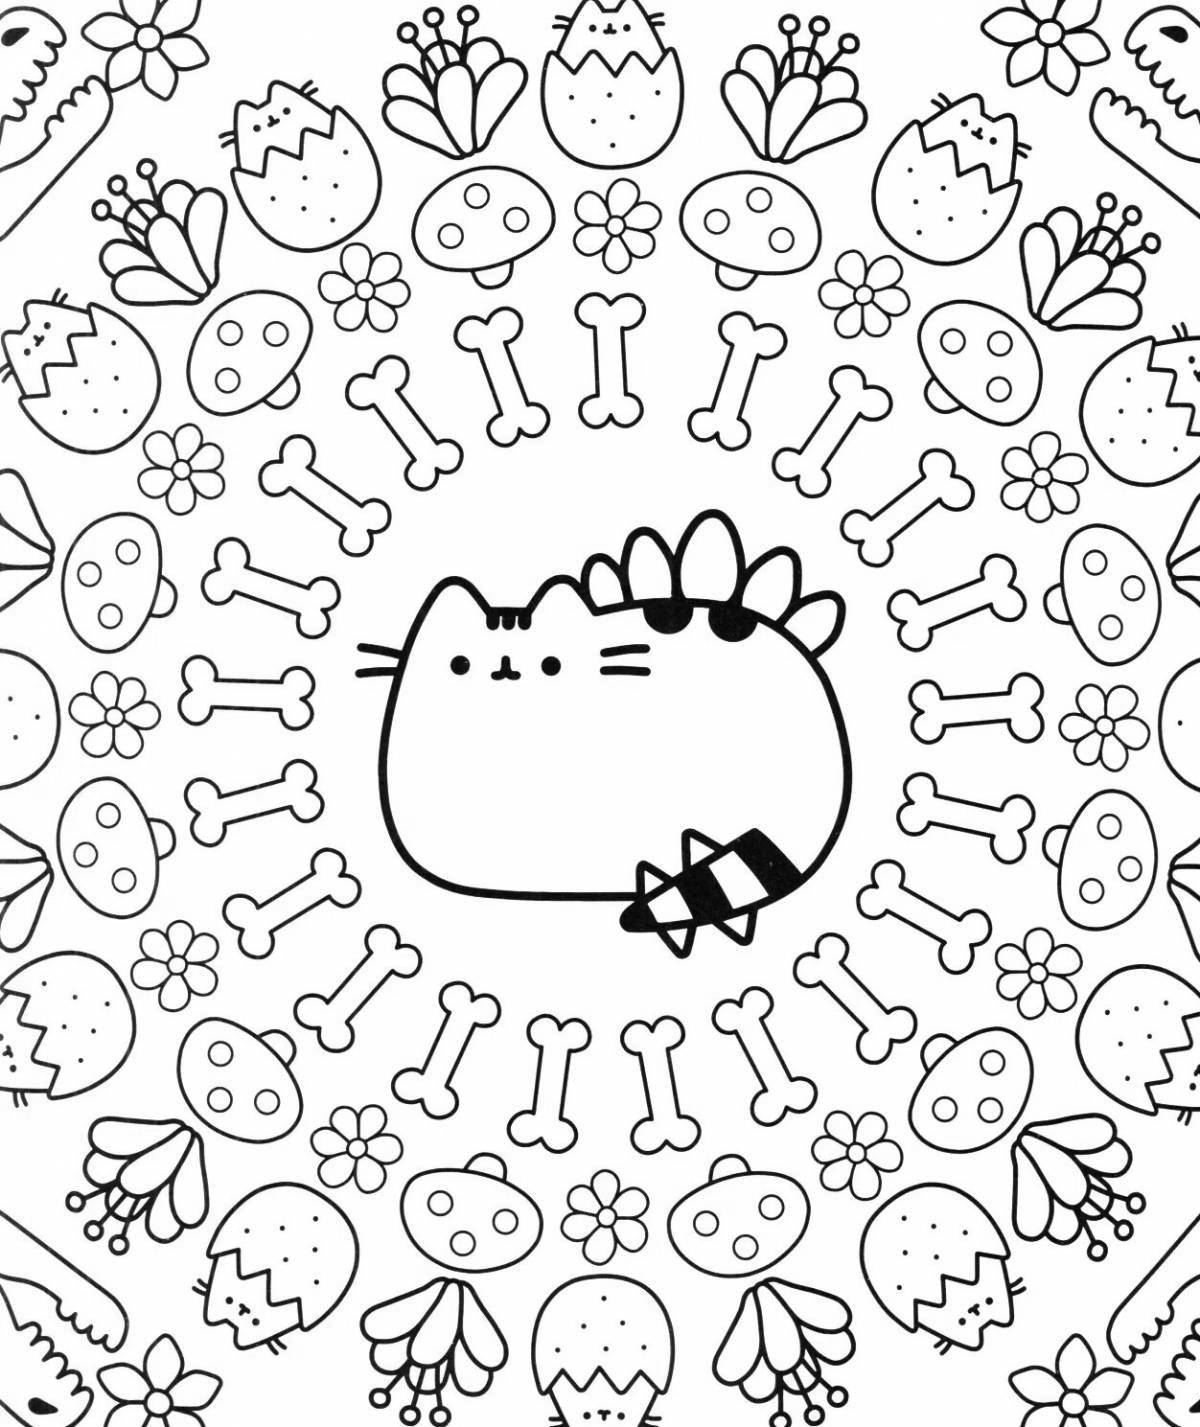 Pusheen's bright Christmas coloring book